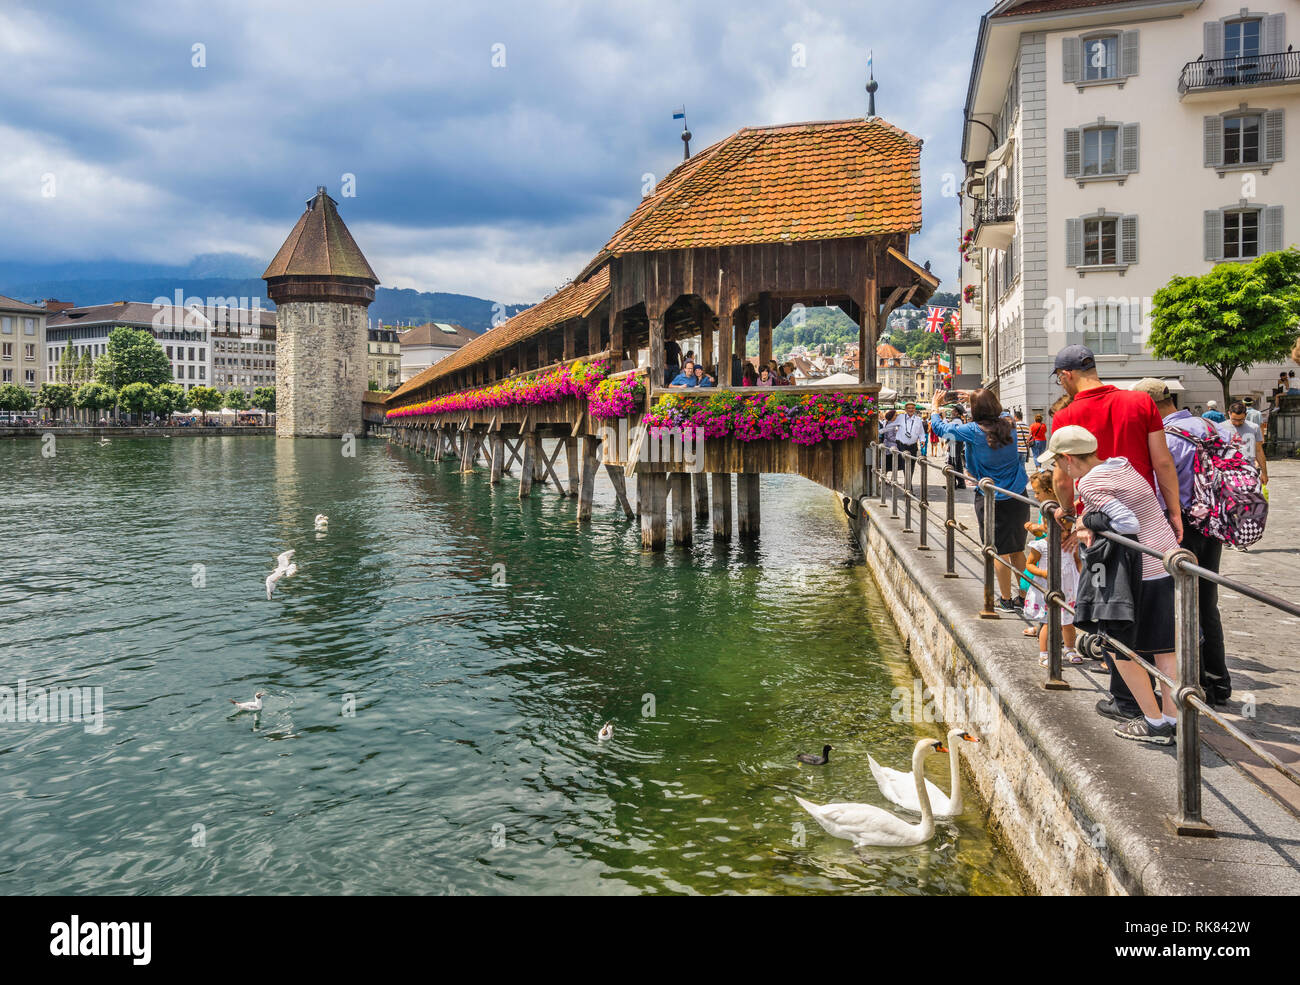 view of the medieval wooden covered Kapellbrücke (Chapel Bridge) across the river Reuss in Lucerne, Switzerland Stock Photo